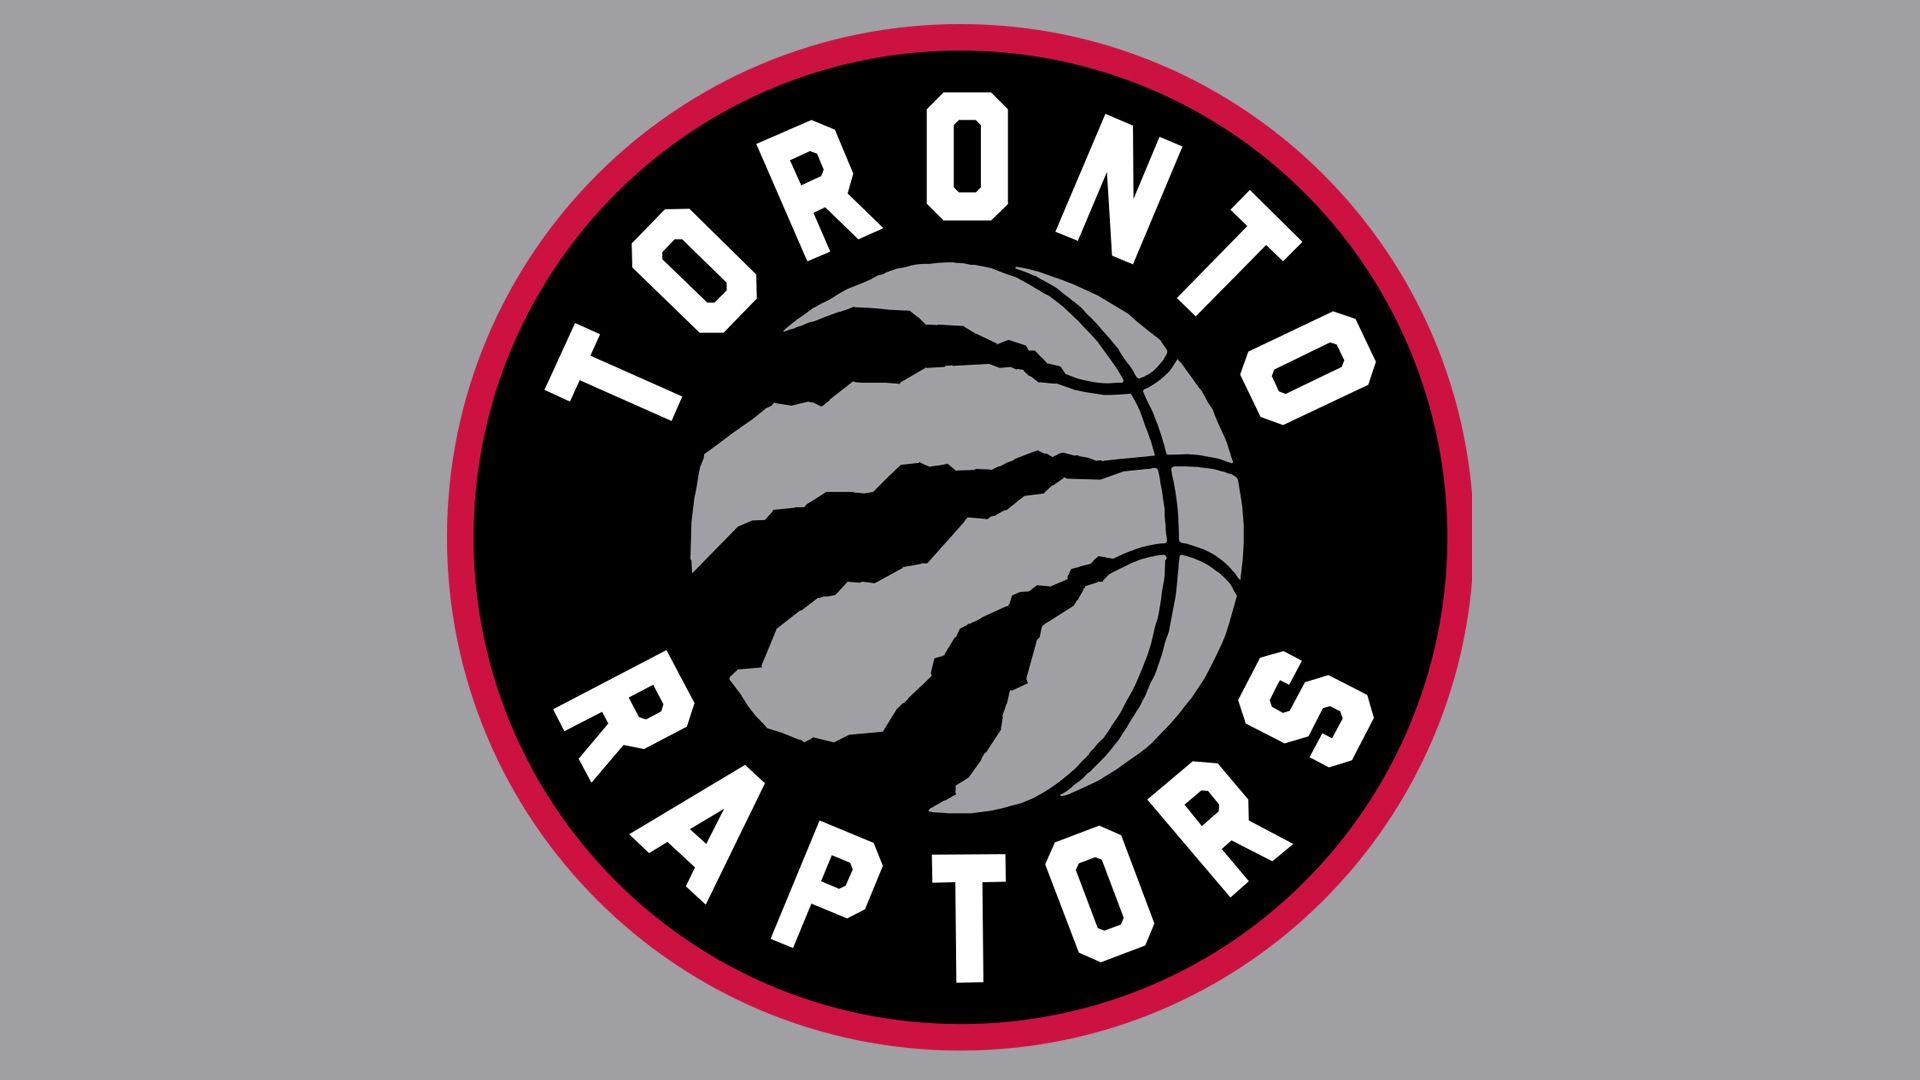 Toronto Raptors Logo - Toronto Raptors Logo, Toronto Raptors Symbol, Meaning, History and ...